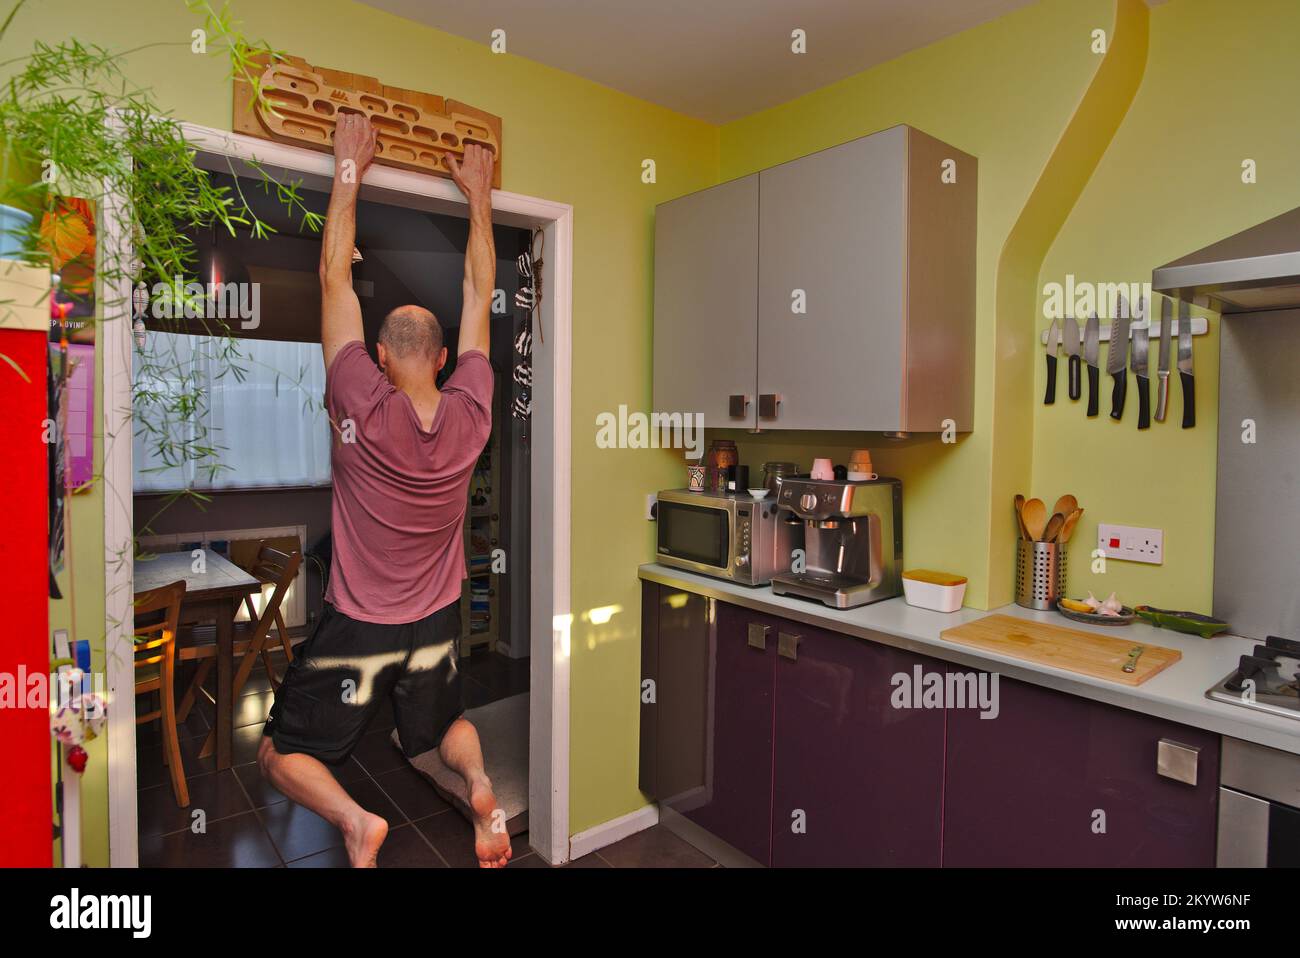 Man strength training at home using a hangboard in his kitchen. Stock Photo